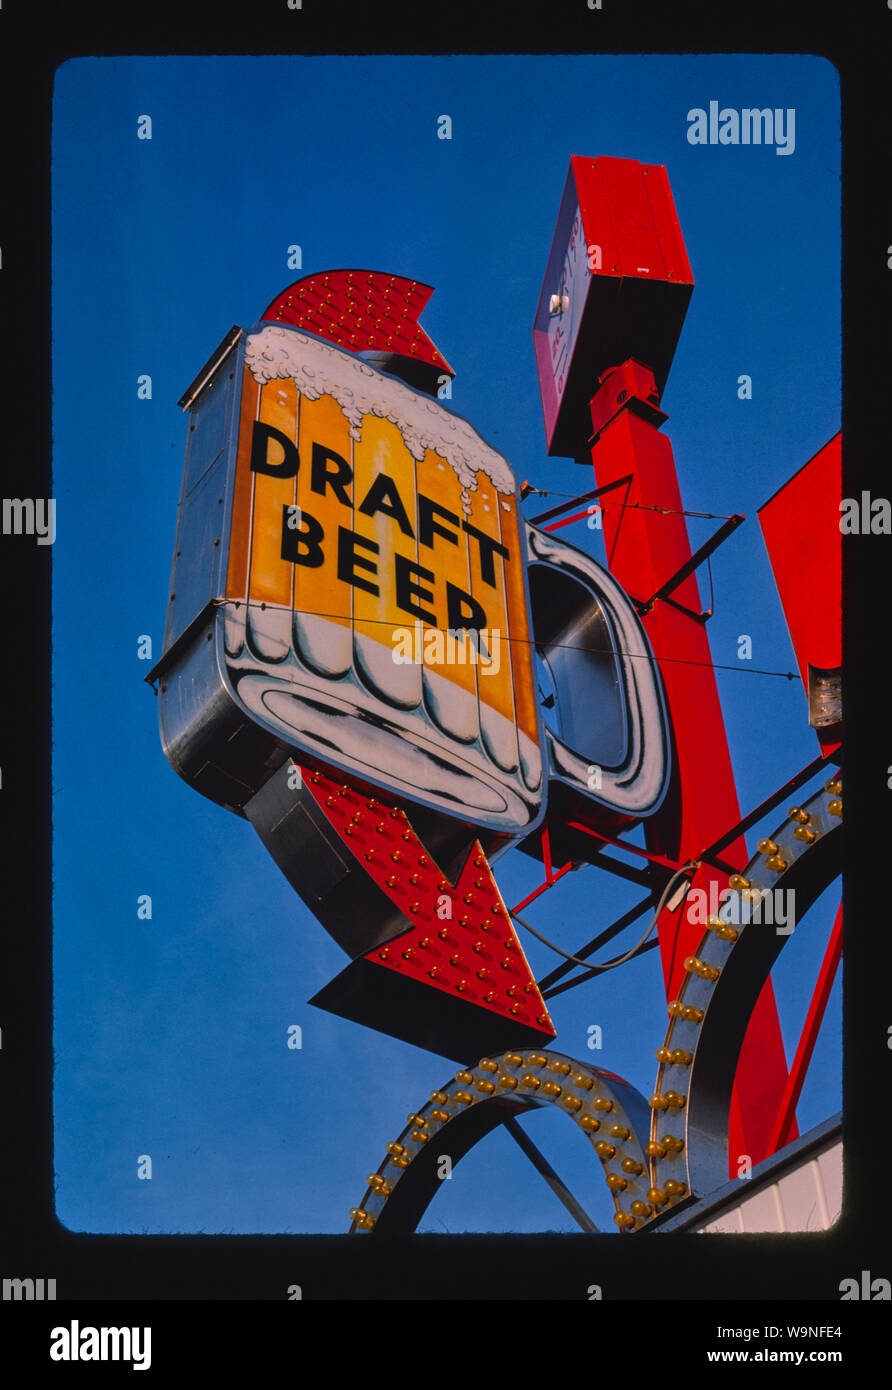 Beer sign, Seaside Heights, New Jersey Stock Photo